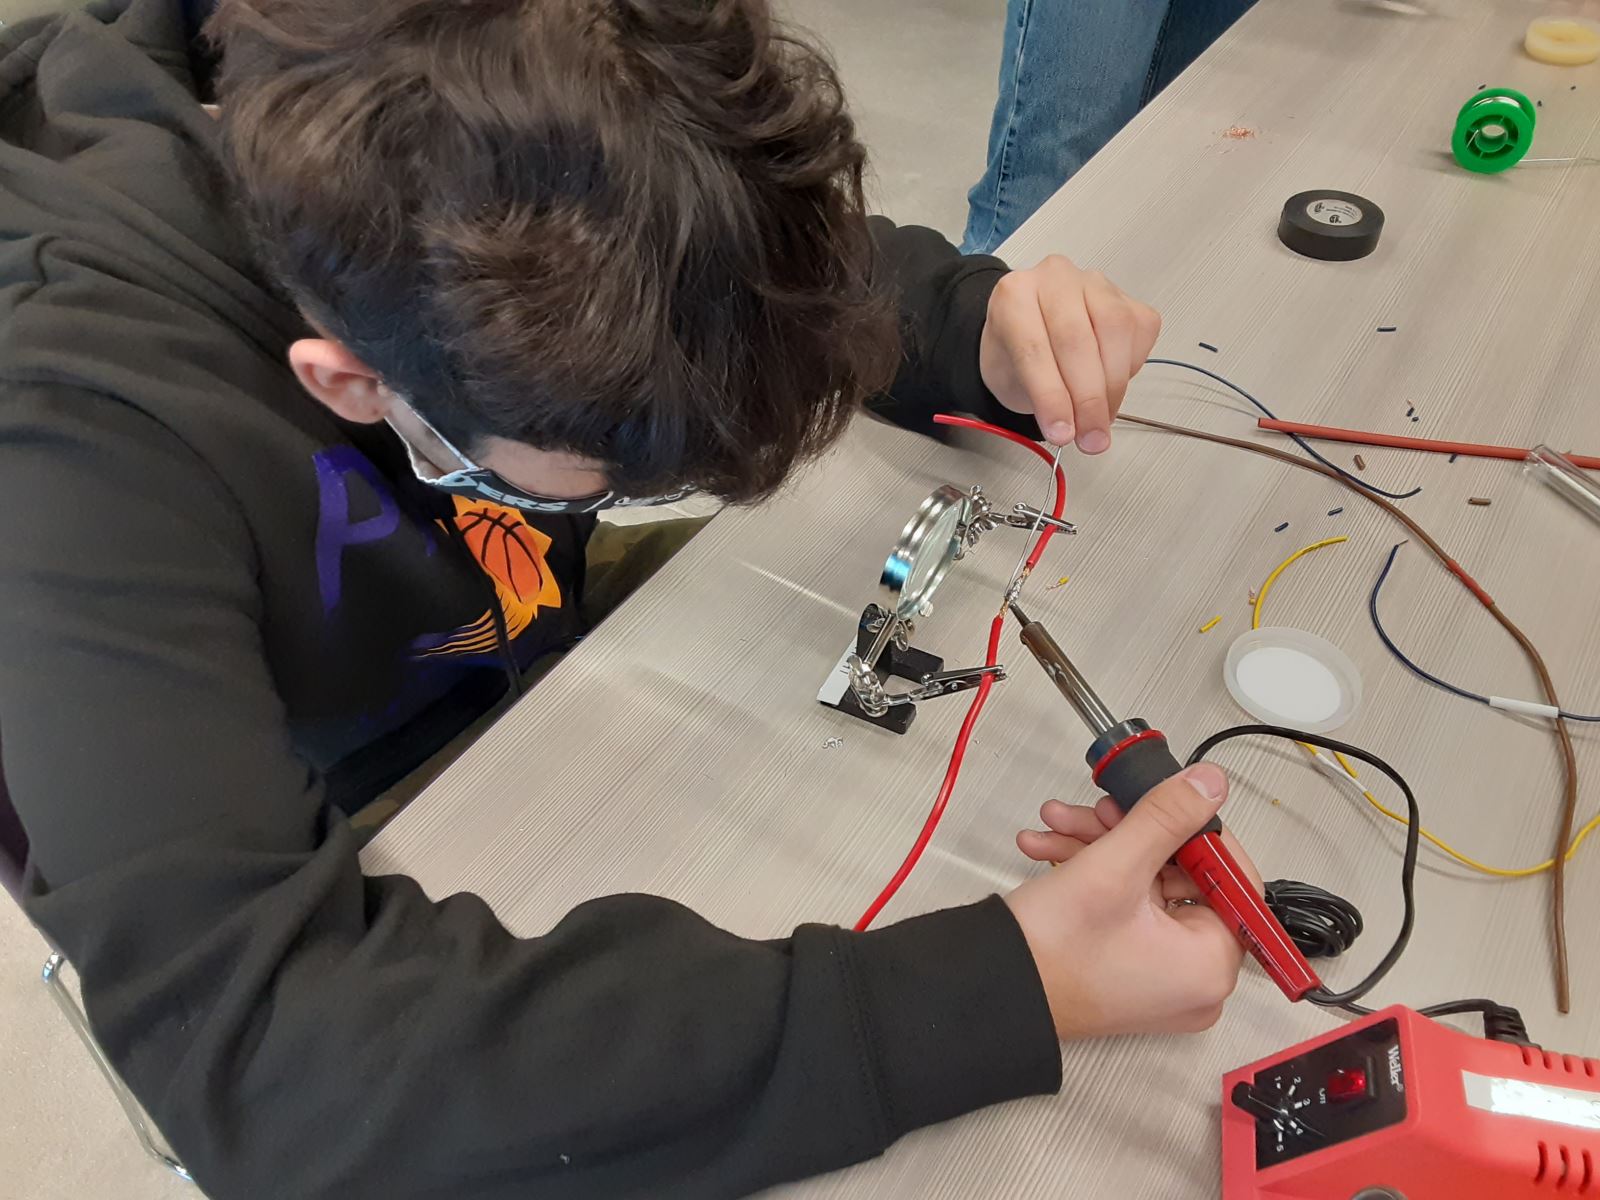 Student practices soldering skills in Automation and Robotics class.